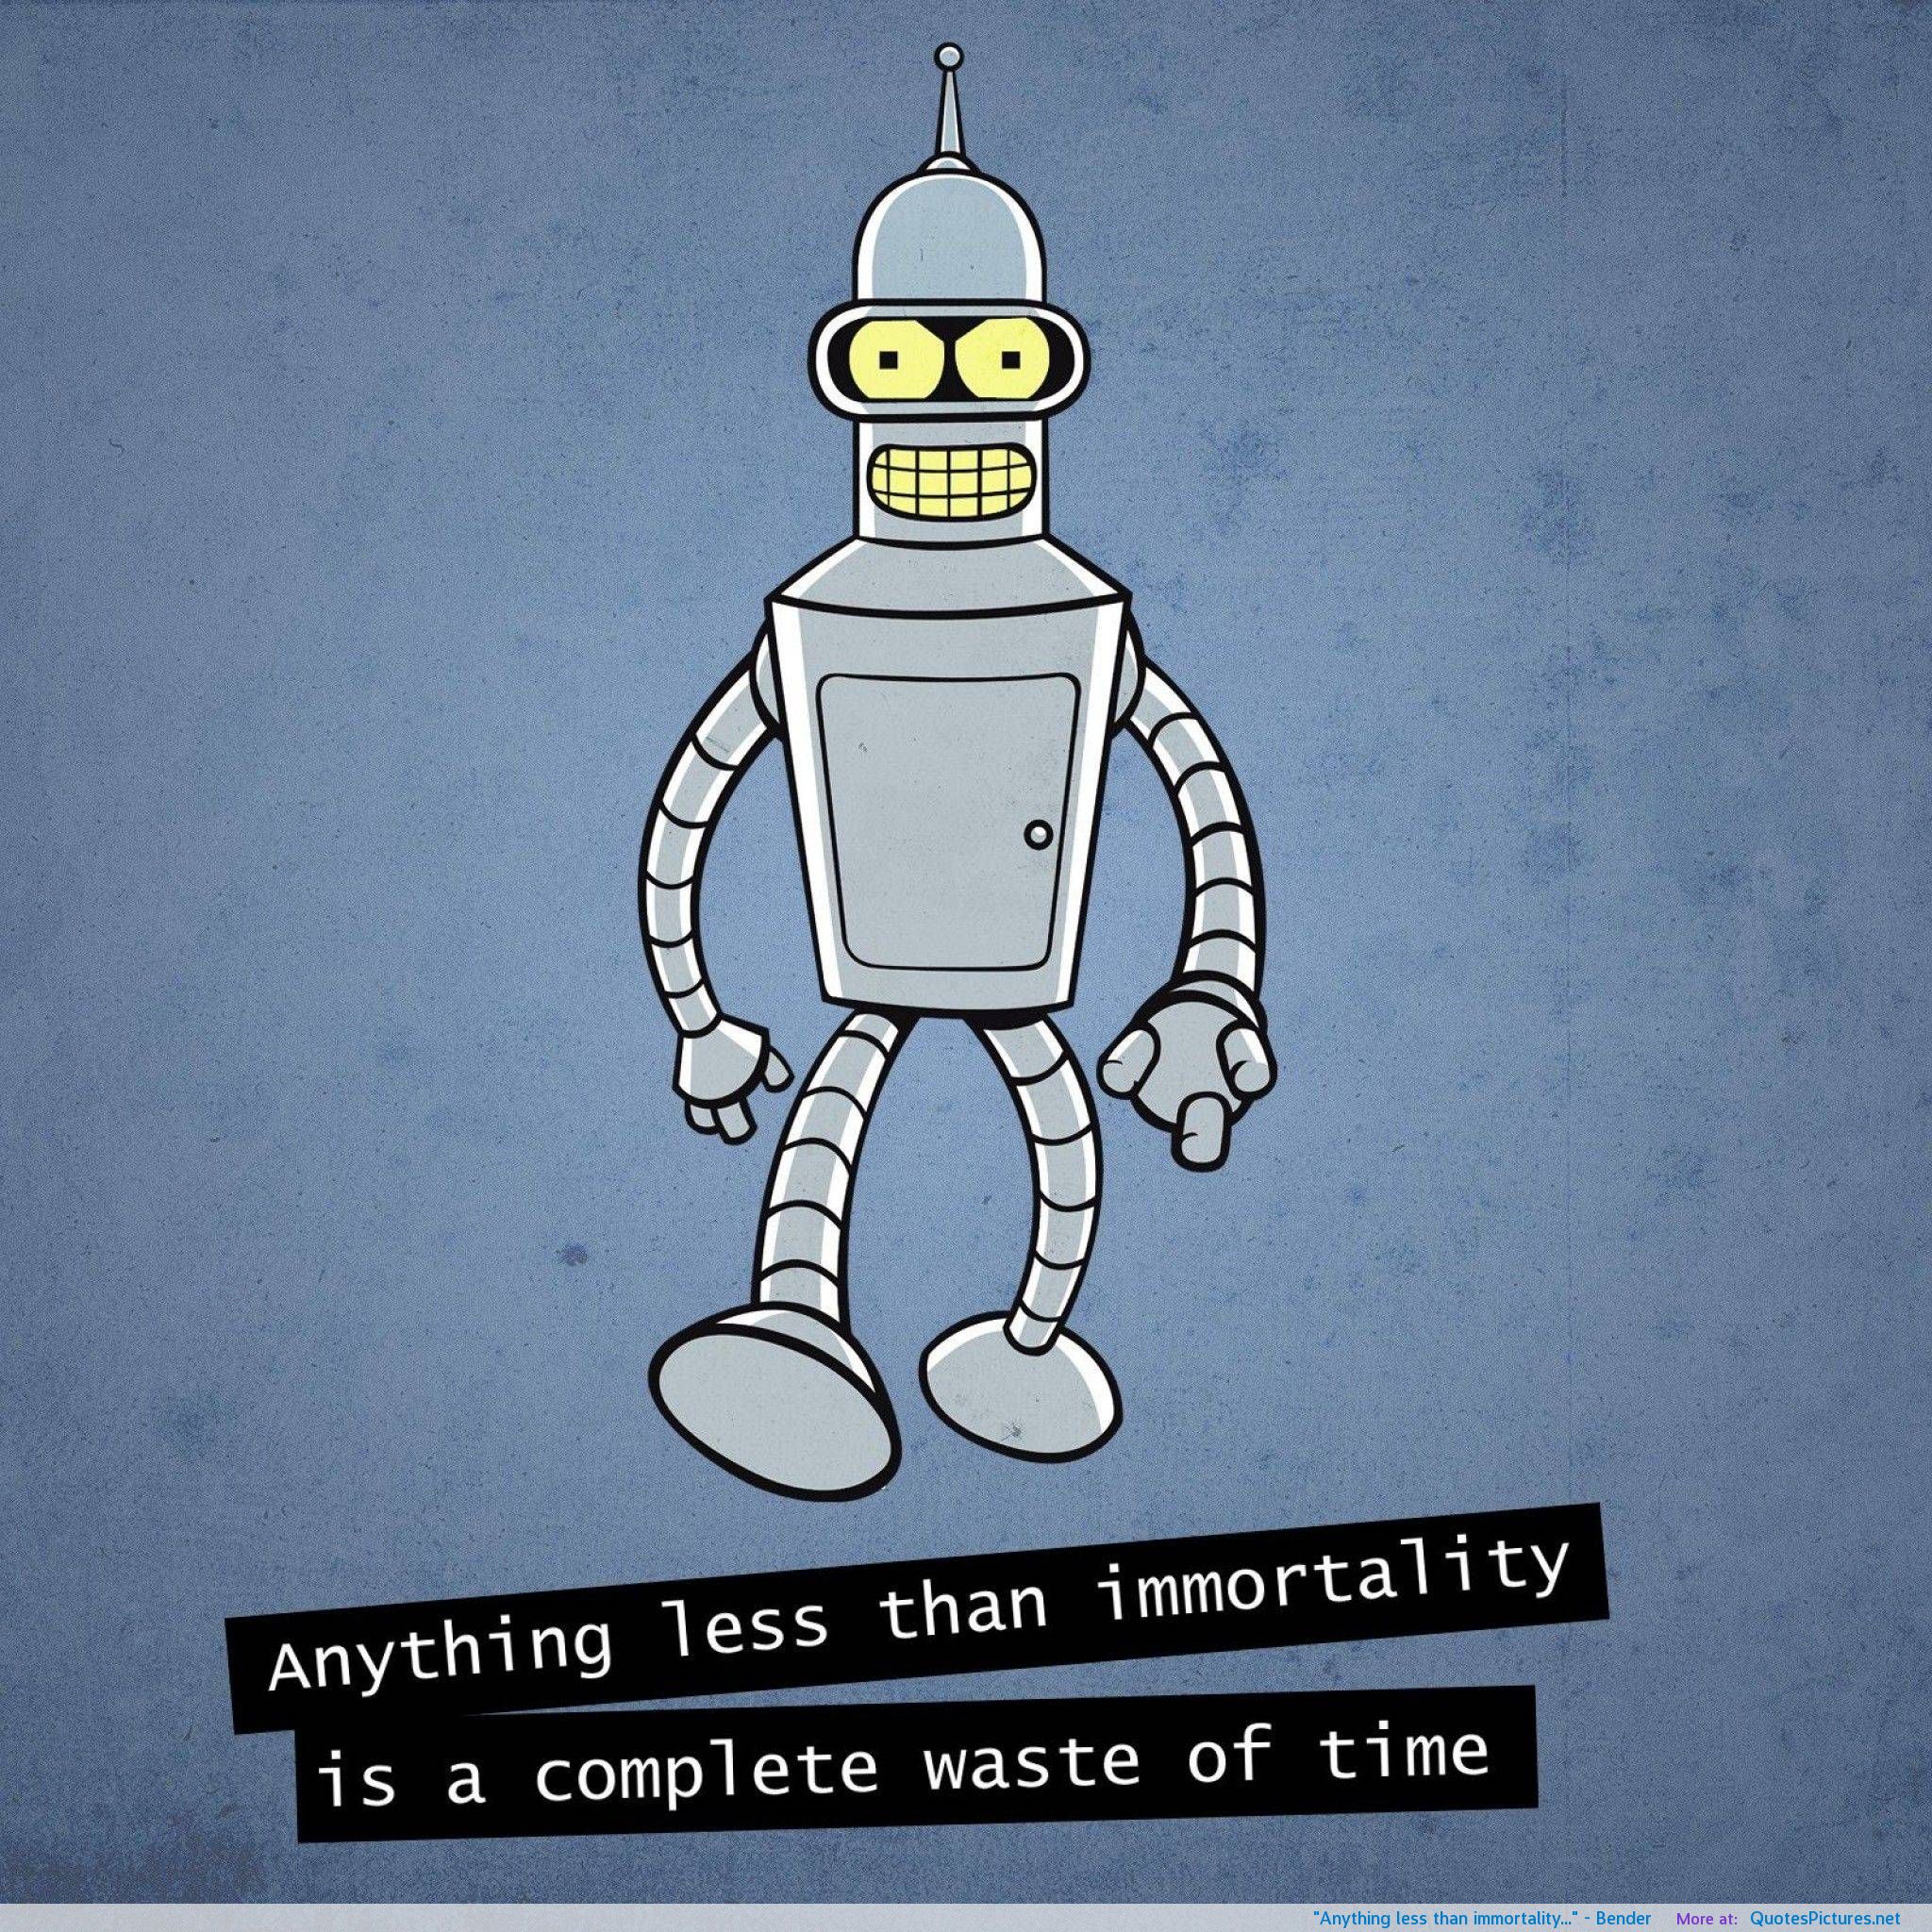 Anything less than immortality is a complete waste of time